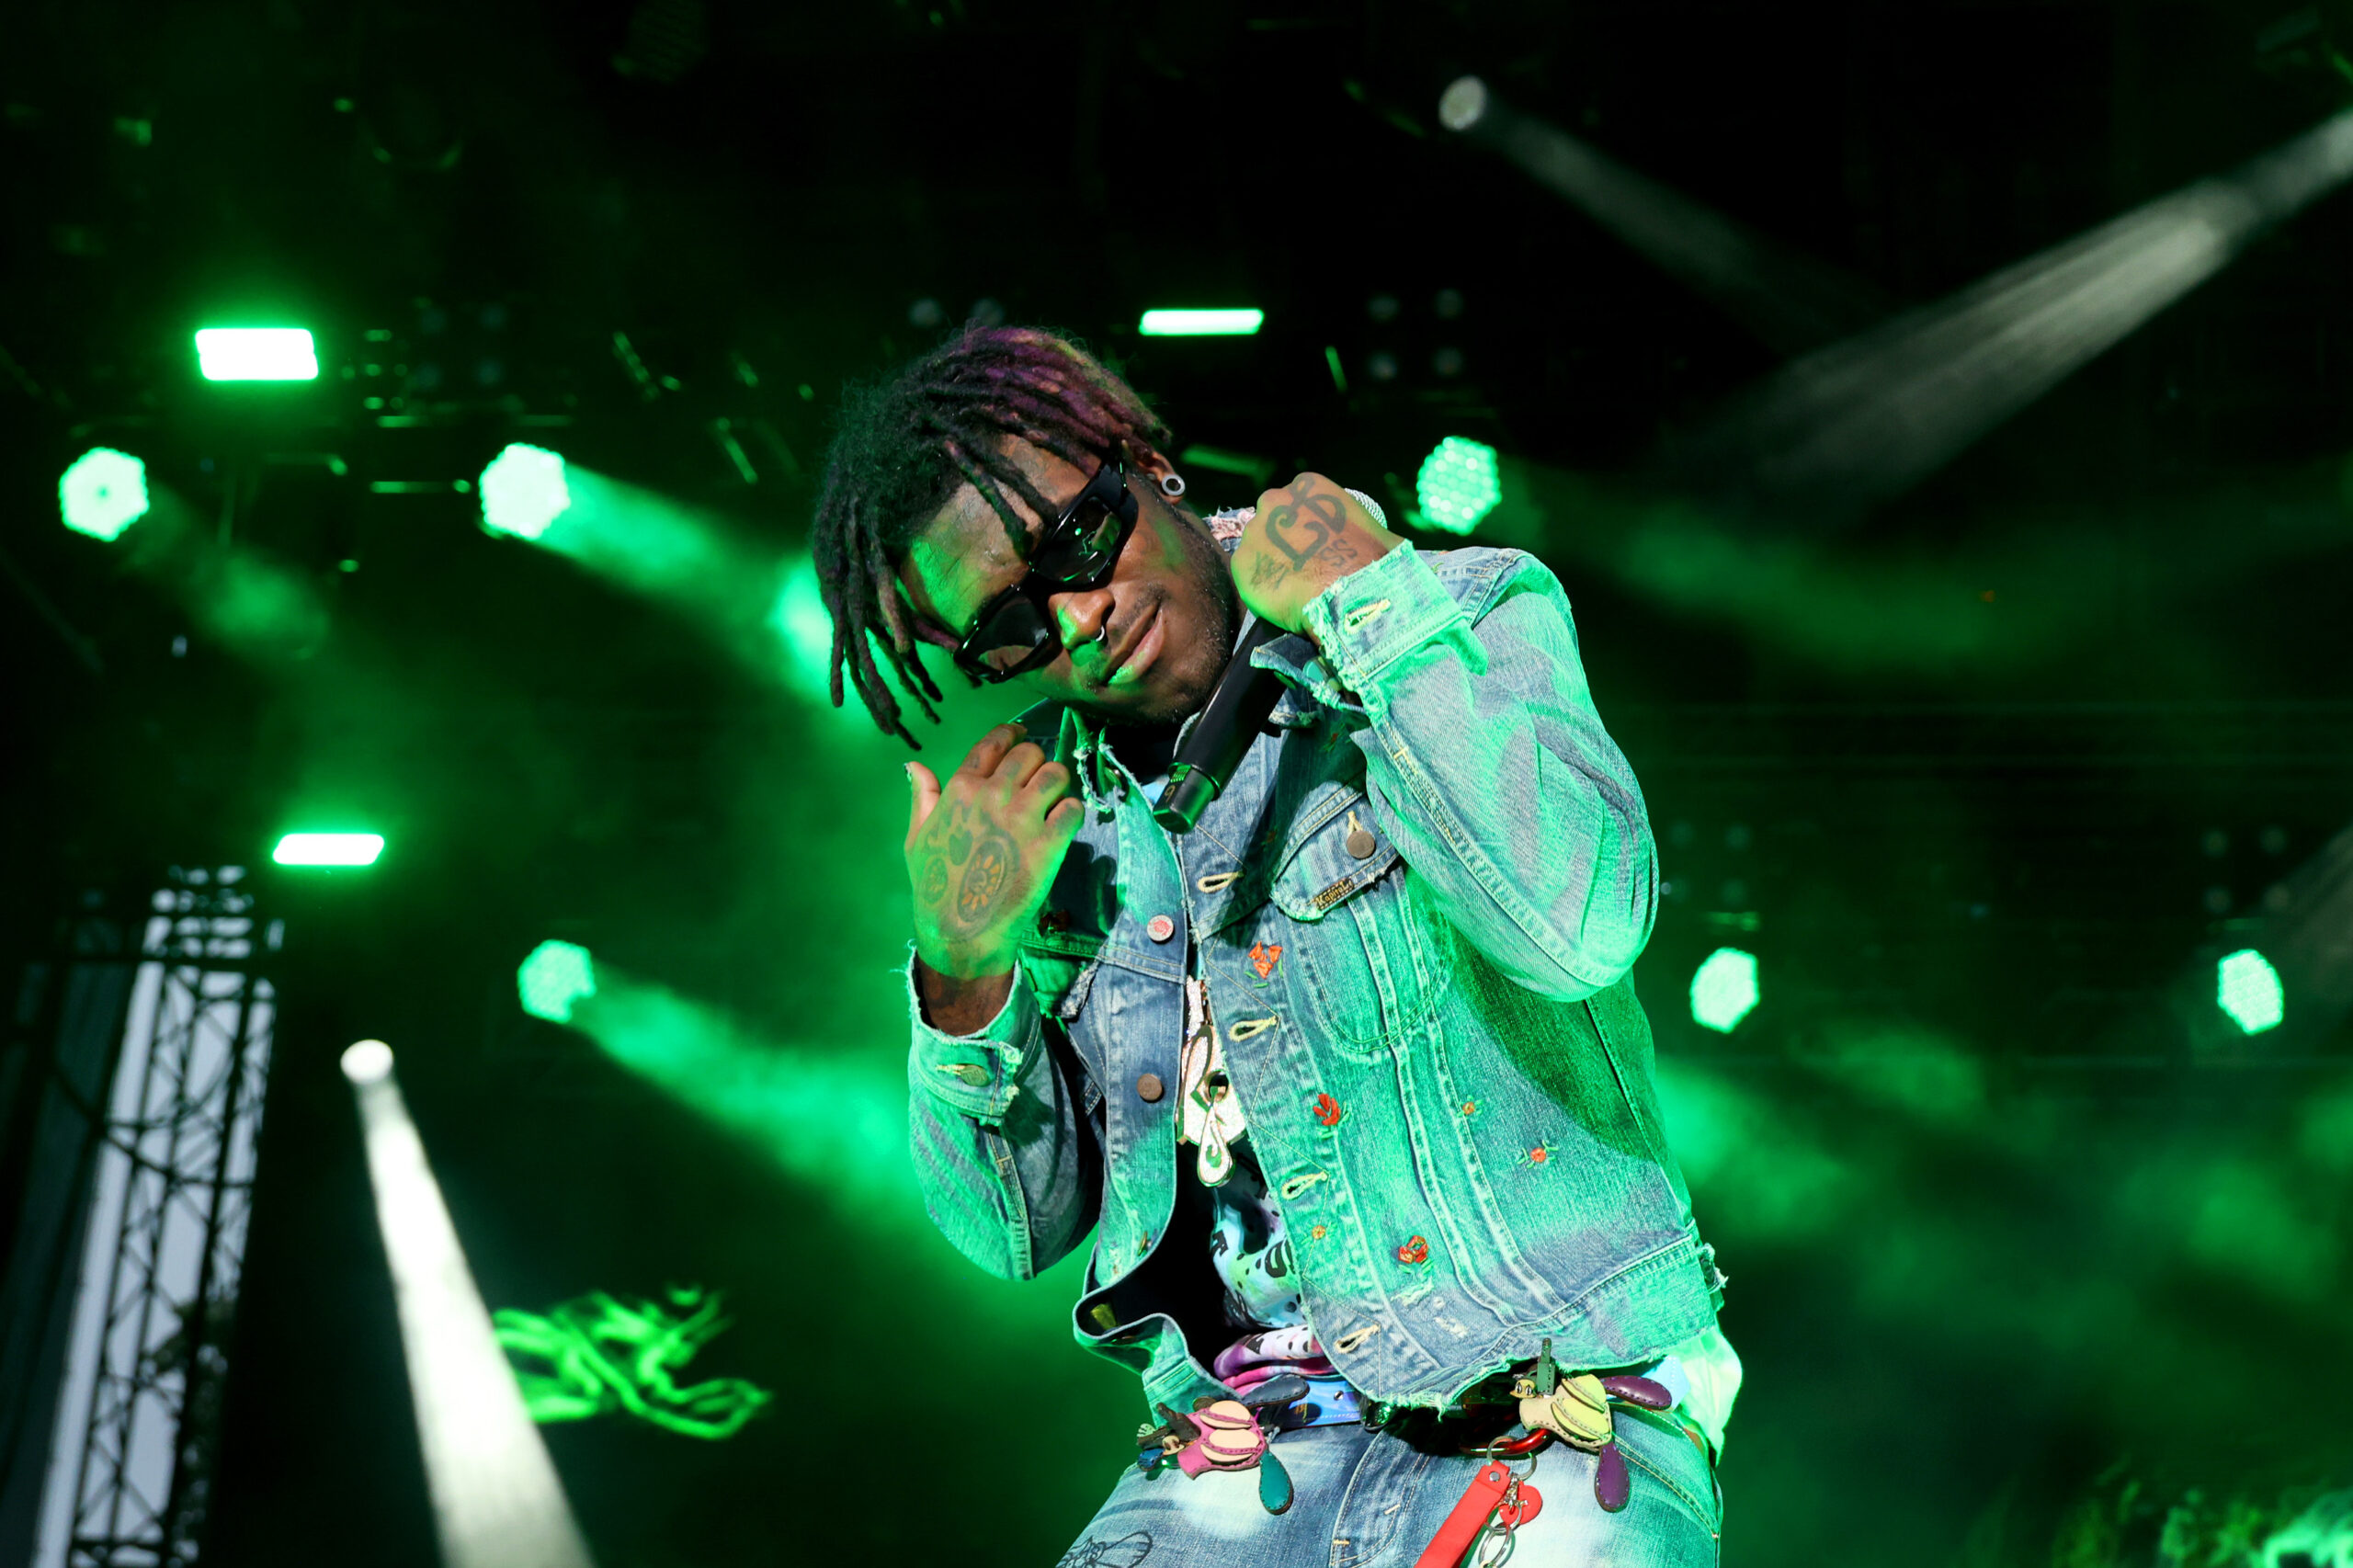 Lil Uzi Vert teases long-awaited release of 'Pink Tape' with